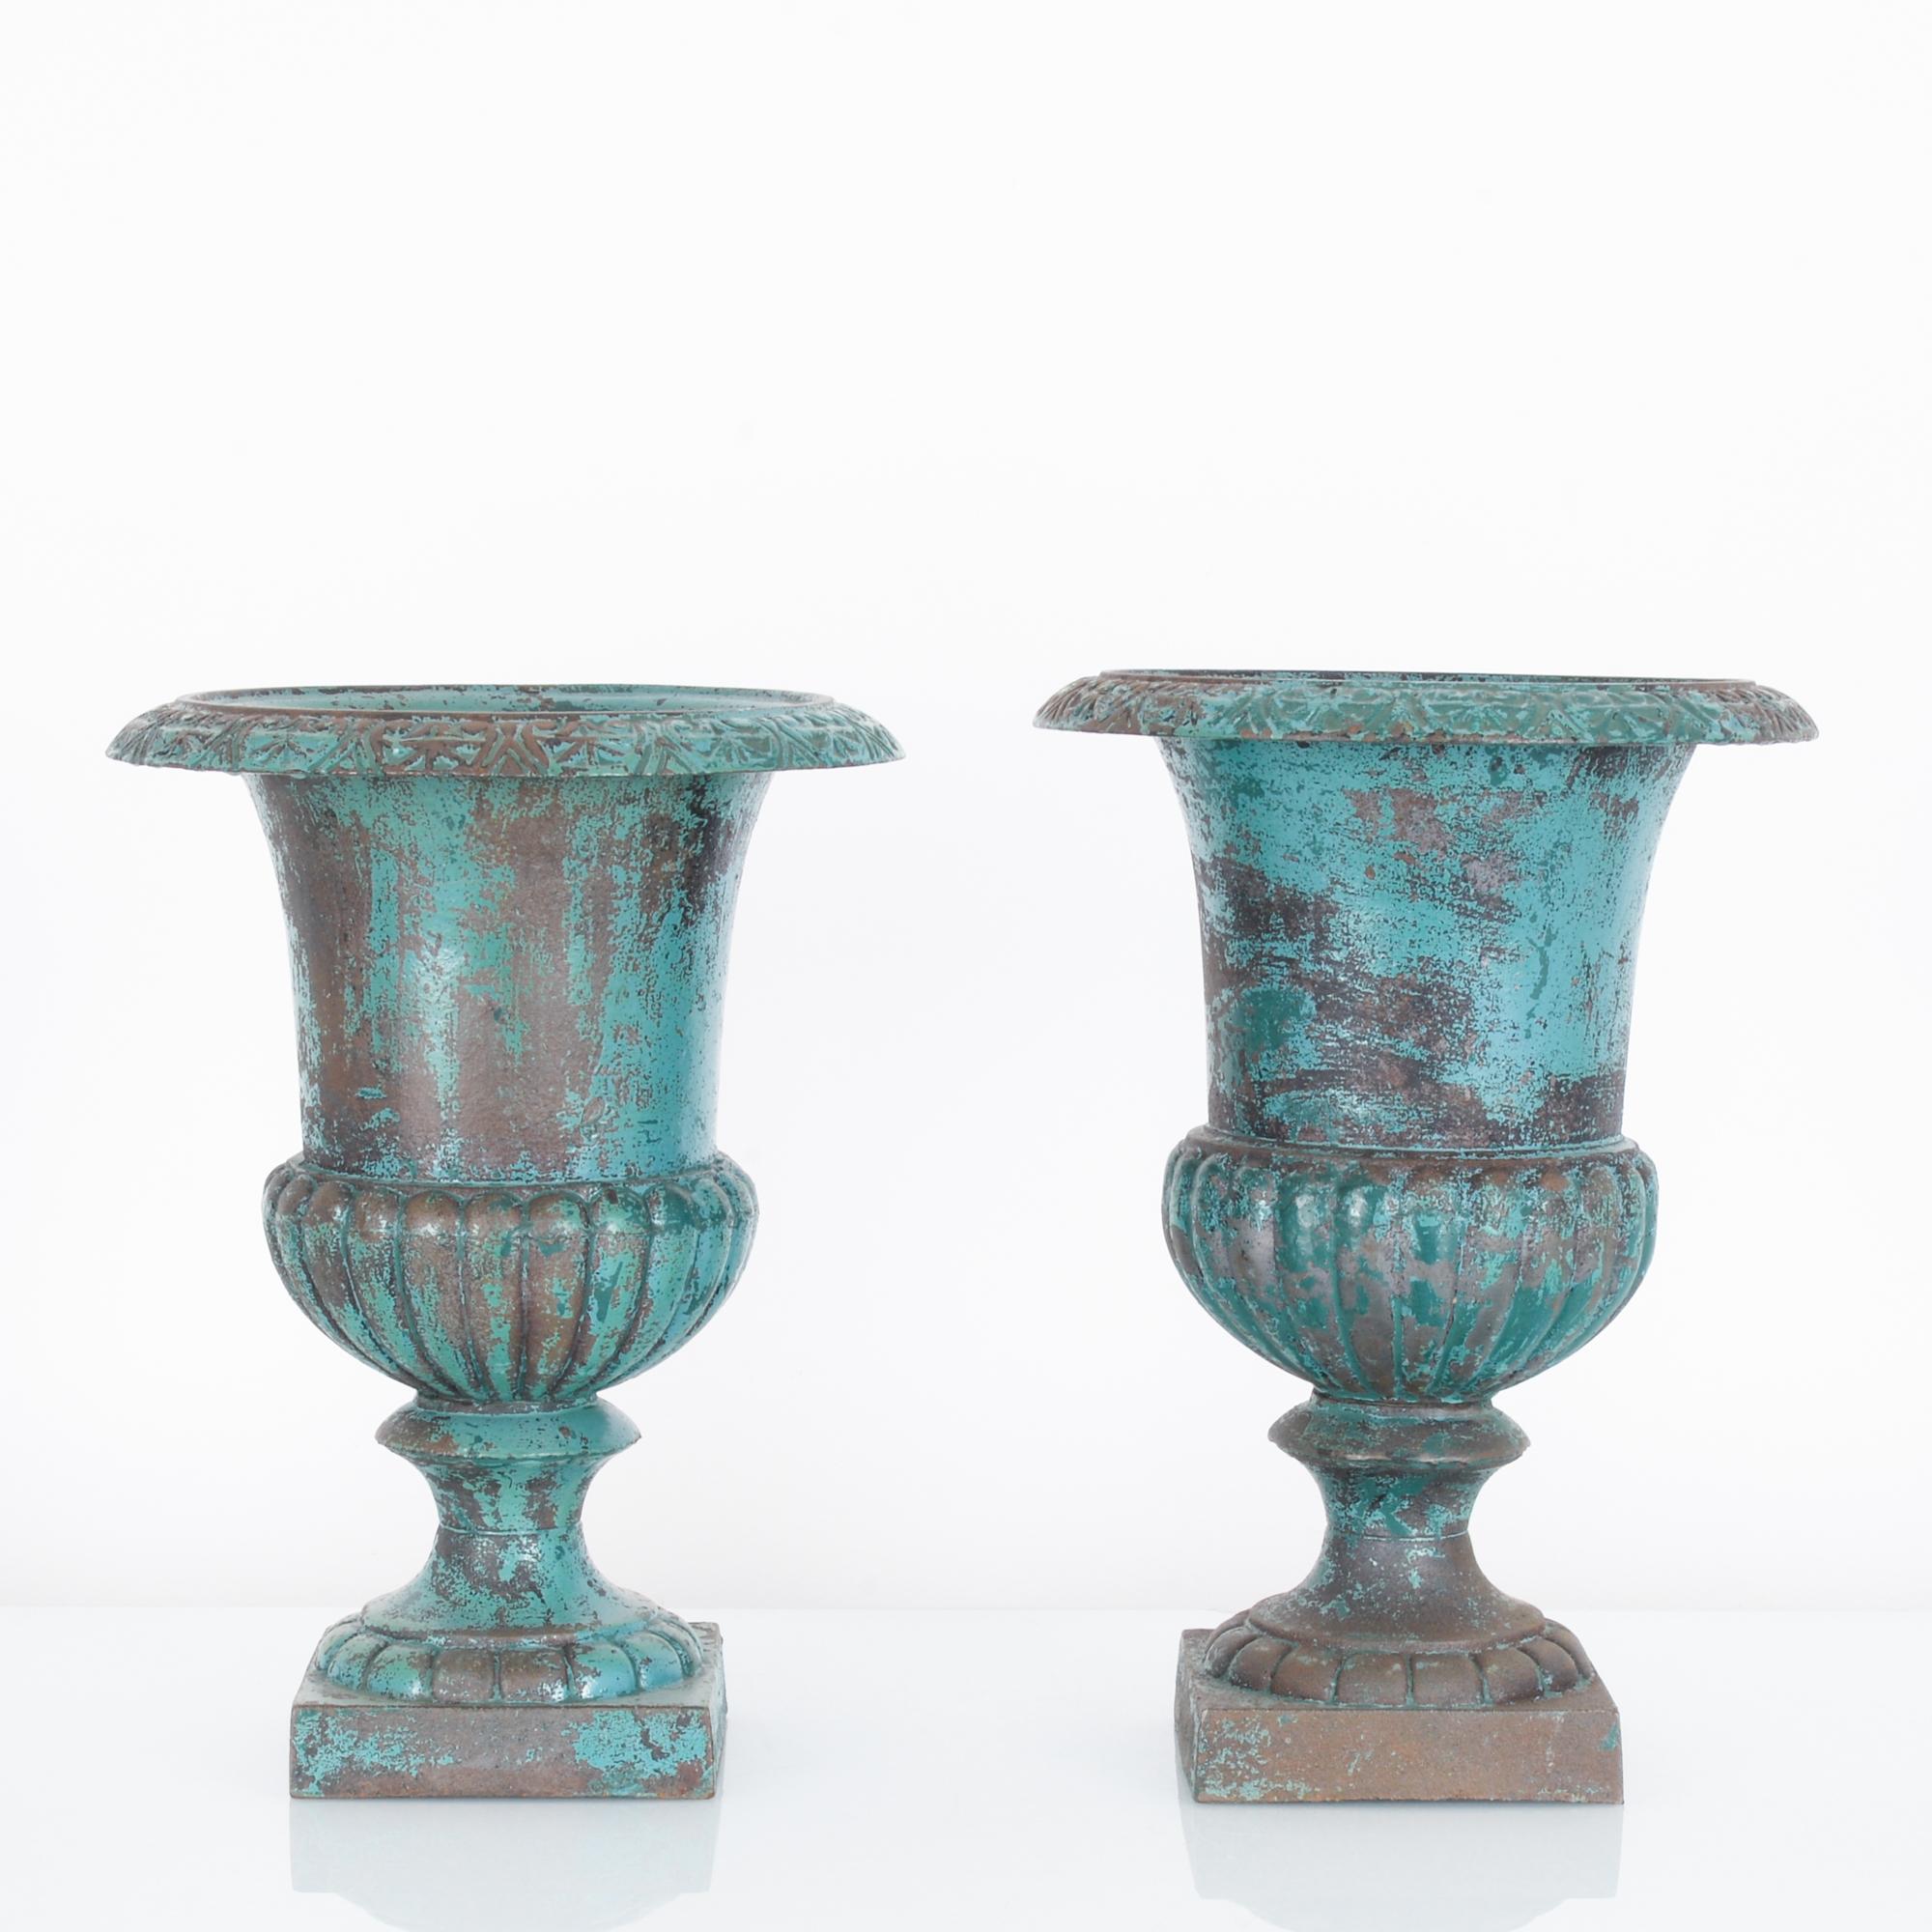 Standing like lilies on pad this striking pair of cast iron planters from France, circa 1900, have a robust lively presence. The finely sculpted bodies of these planters evoke the natural world that will fill them. The bowls display a fine